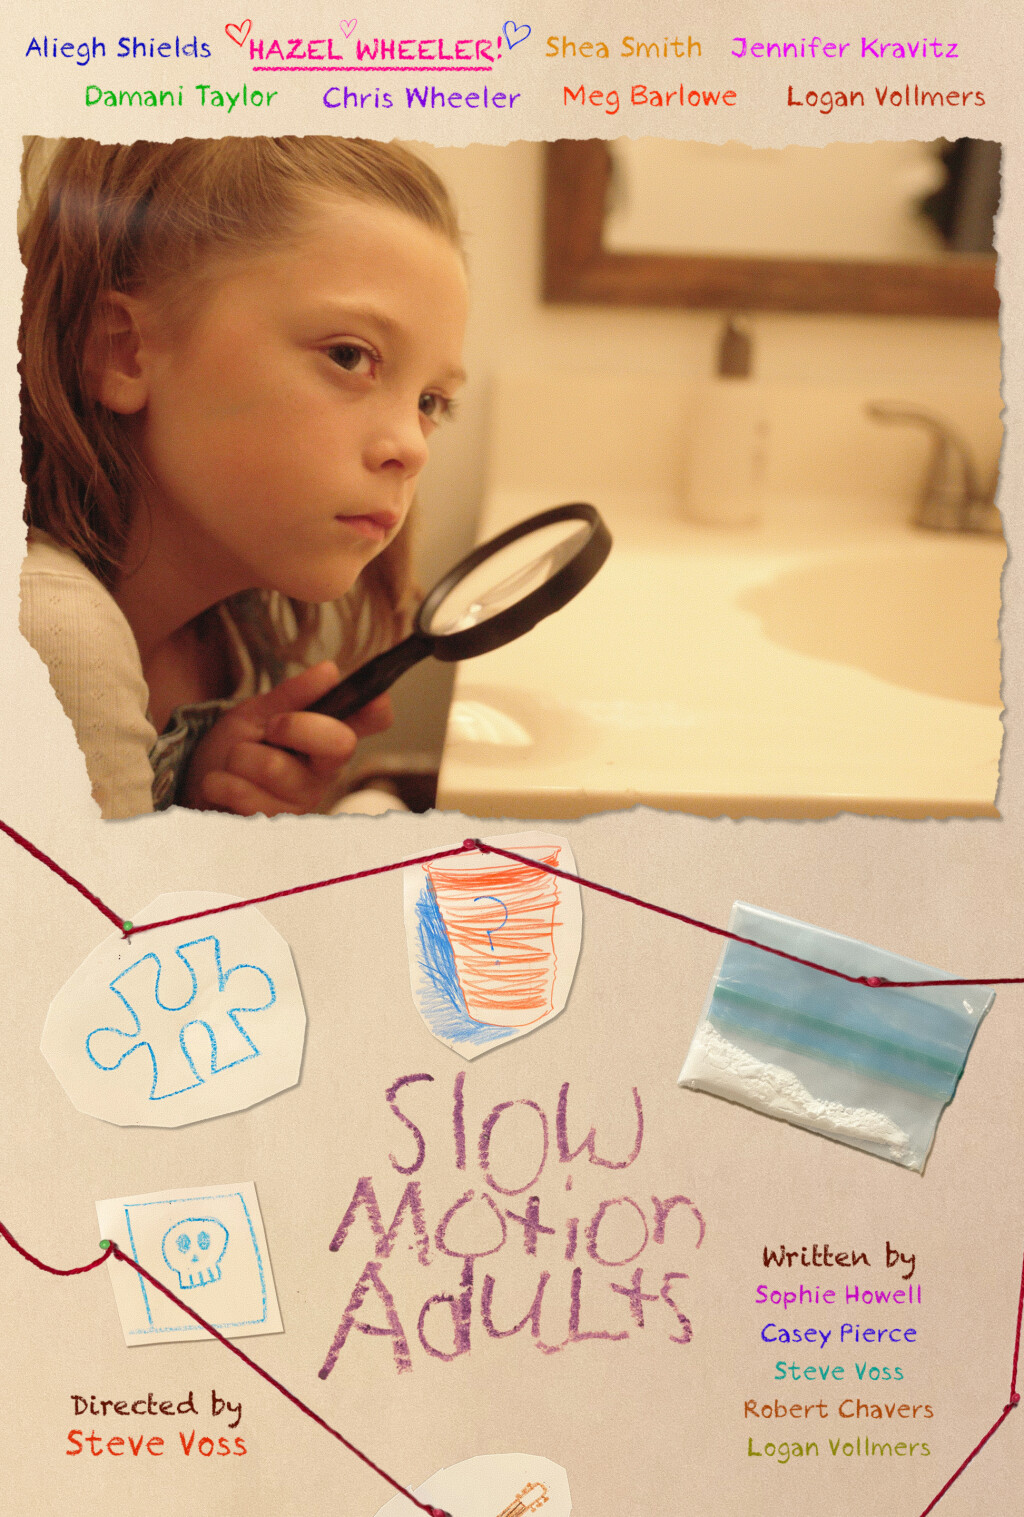 Filmposter for Slow Motion Adults